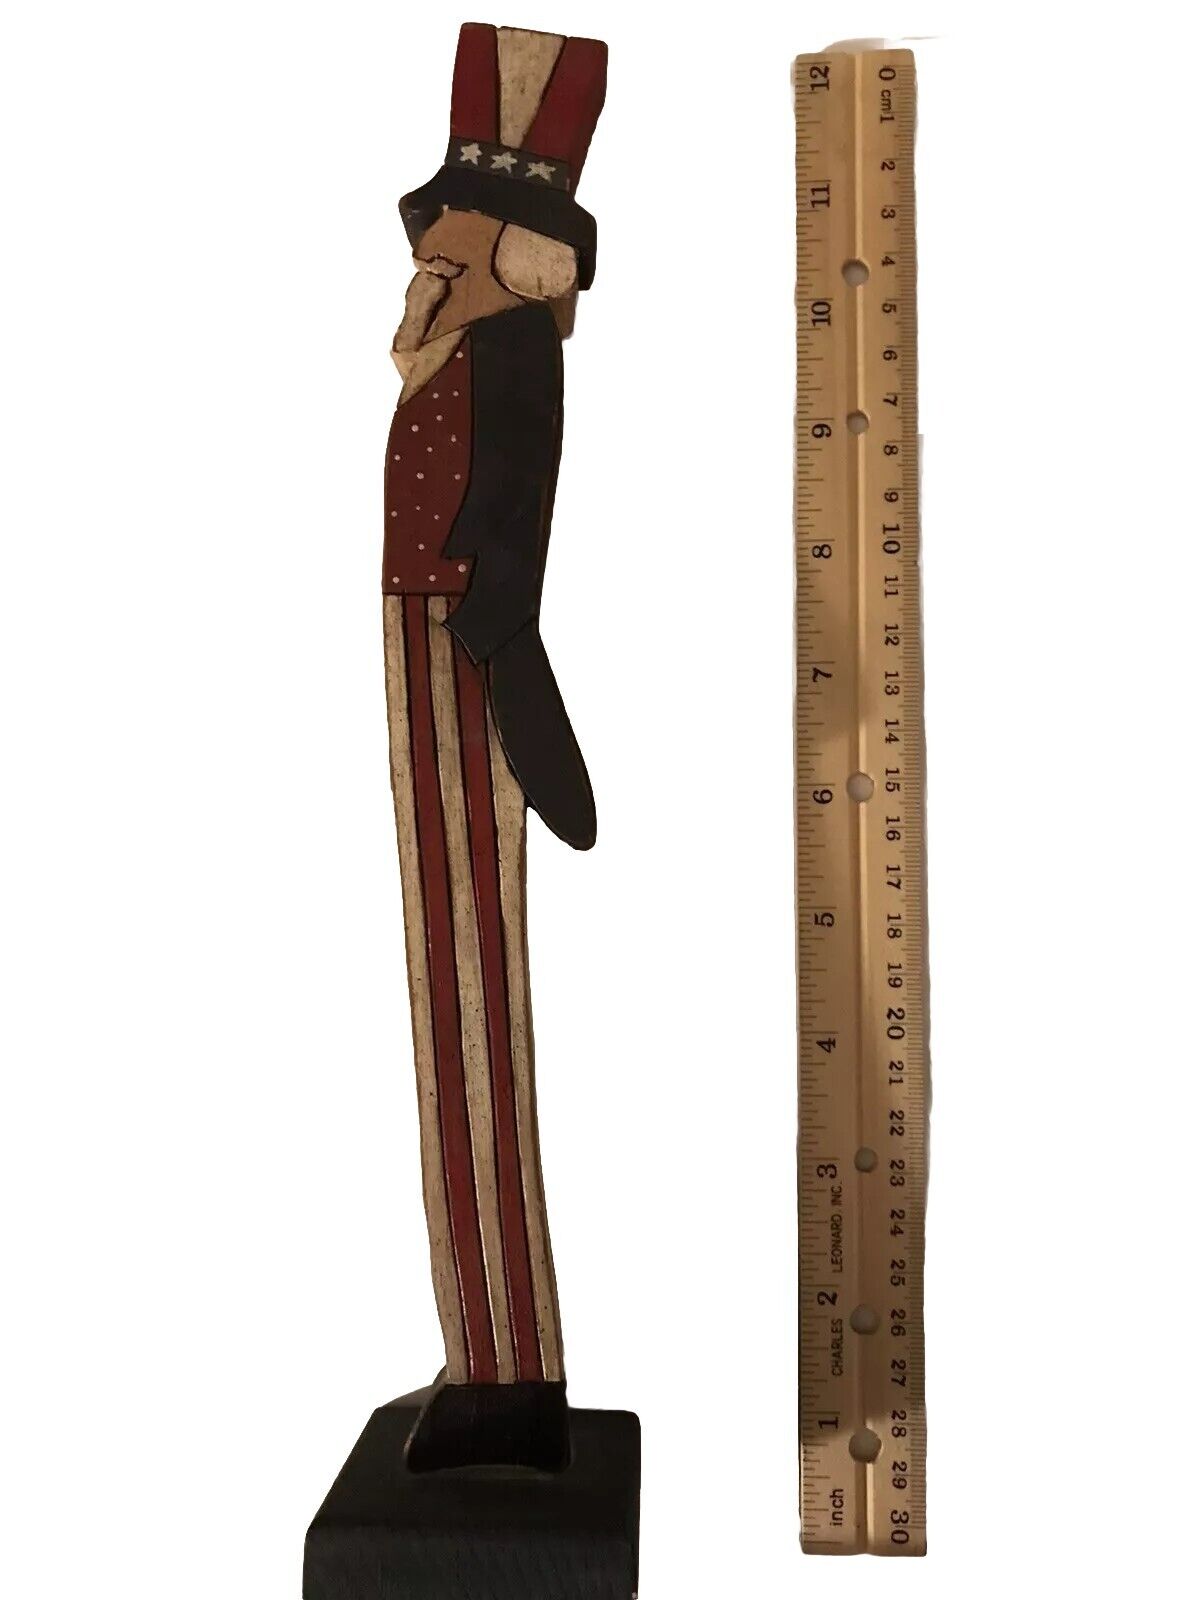 Stylized Wooden Uncle Sam 11 3/4  inches Tall red white blue patriotic Statue